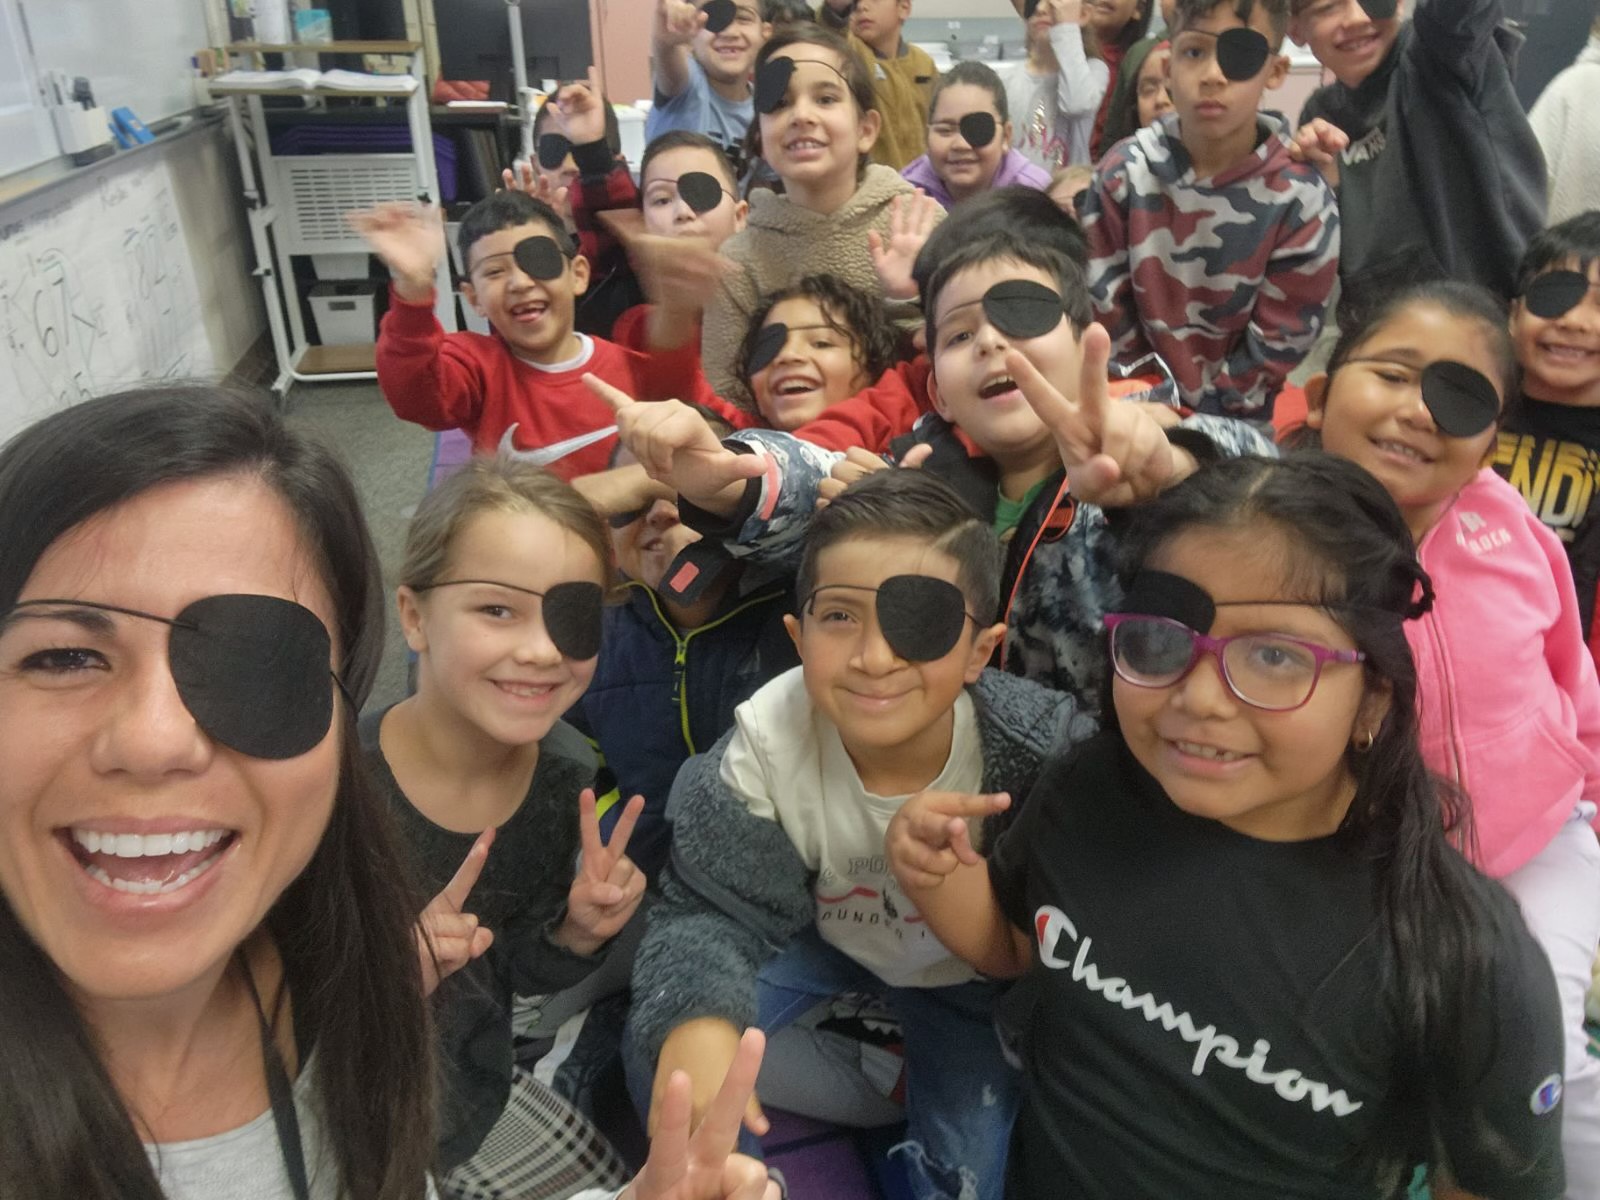 2nd grade students on Pirate day wearing Eye patches